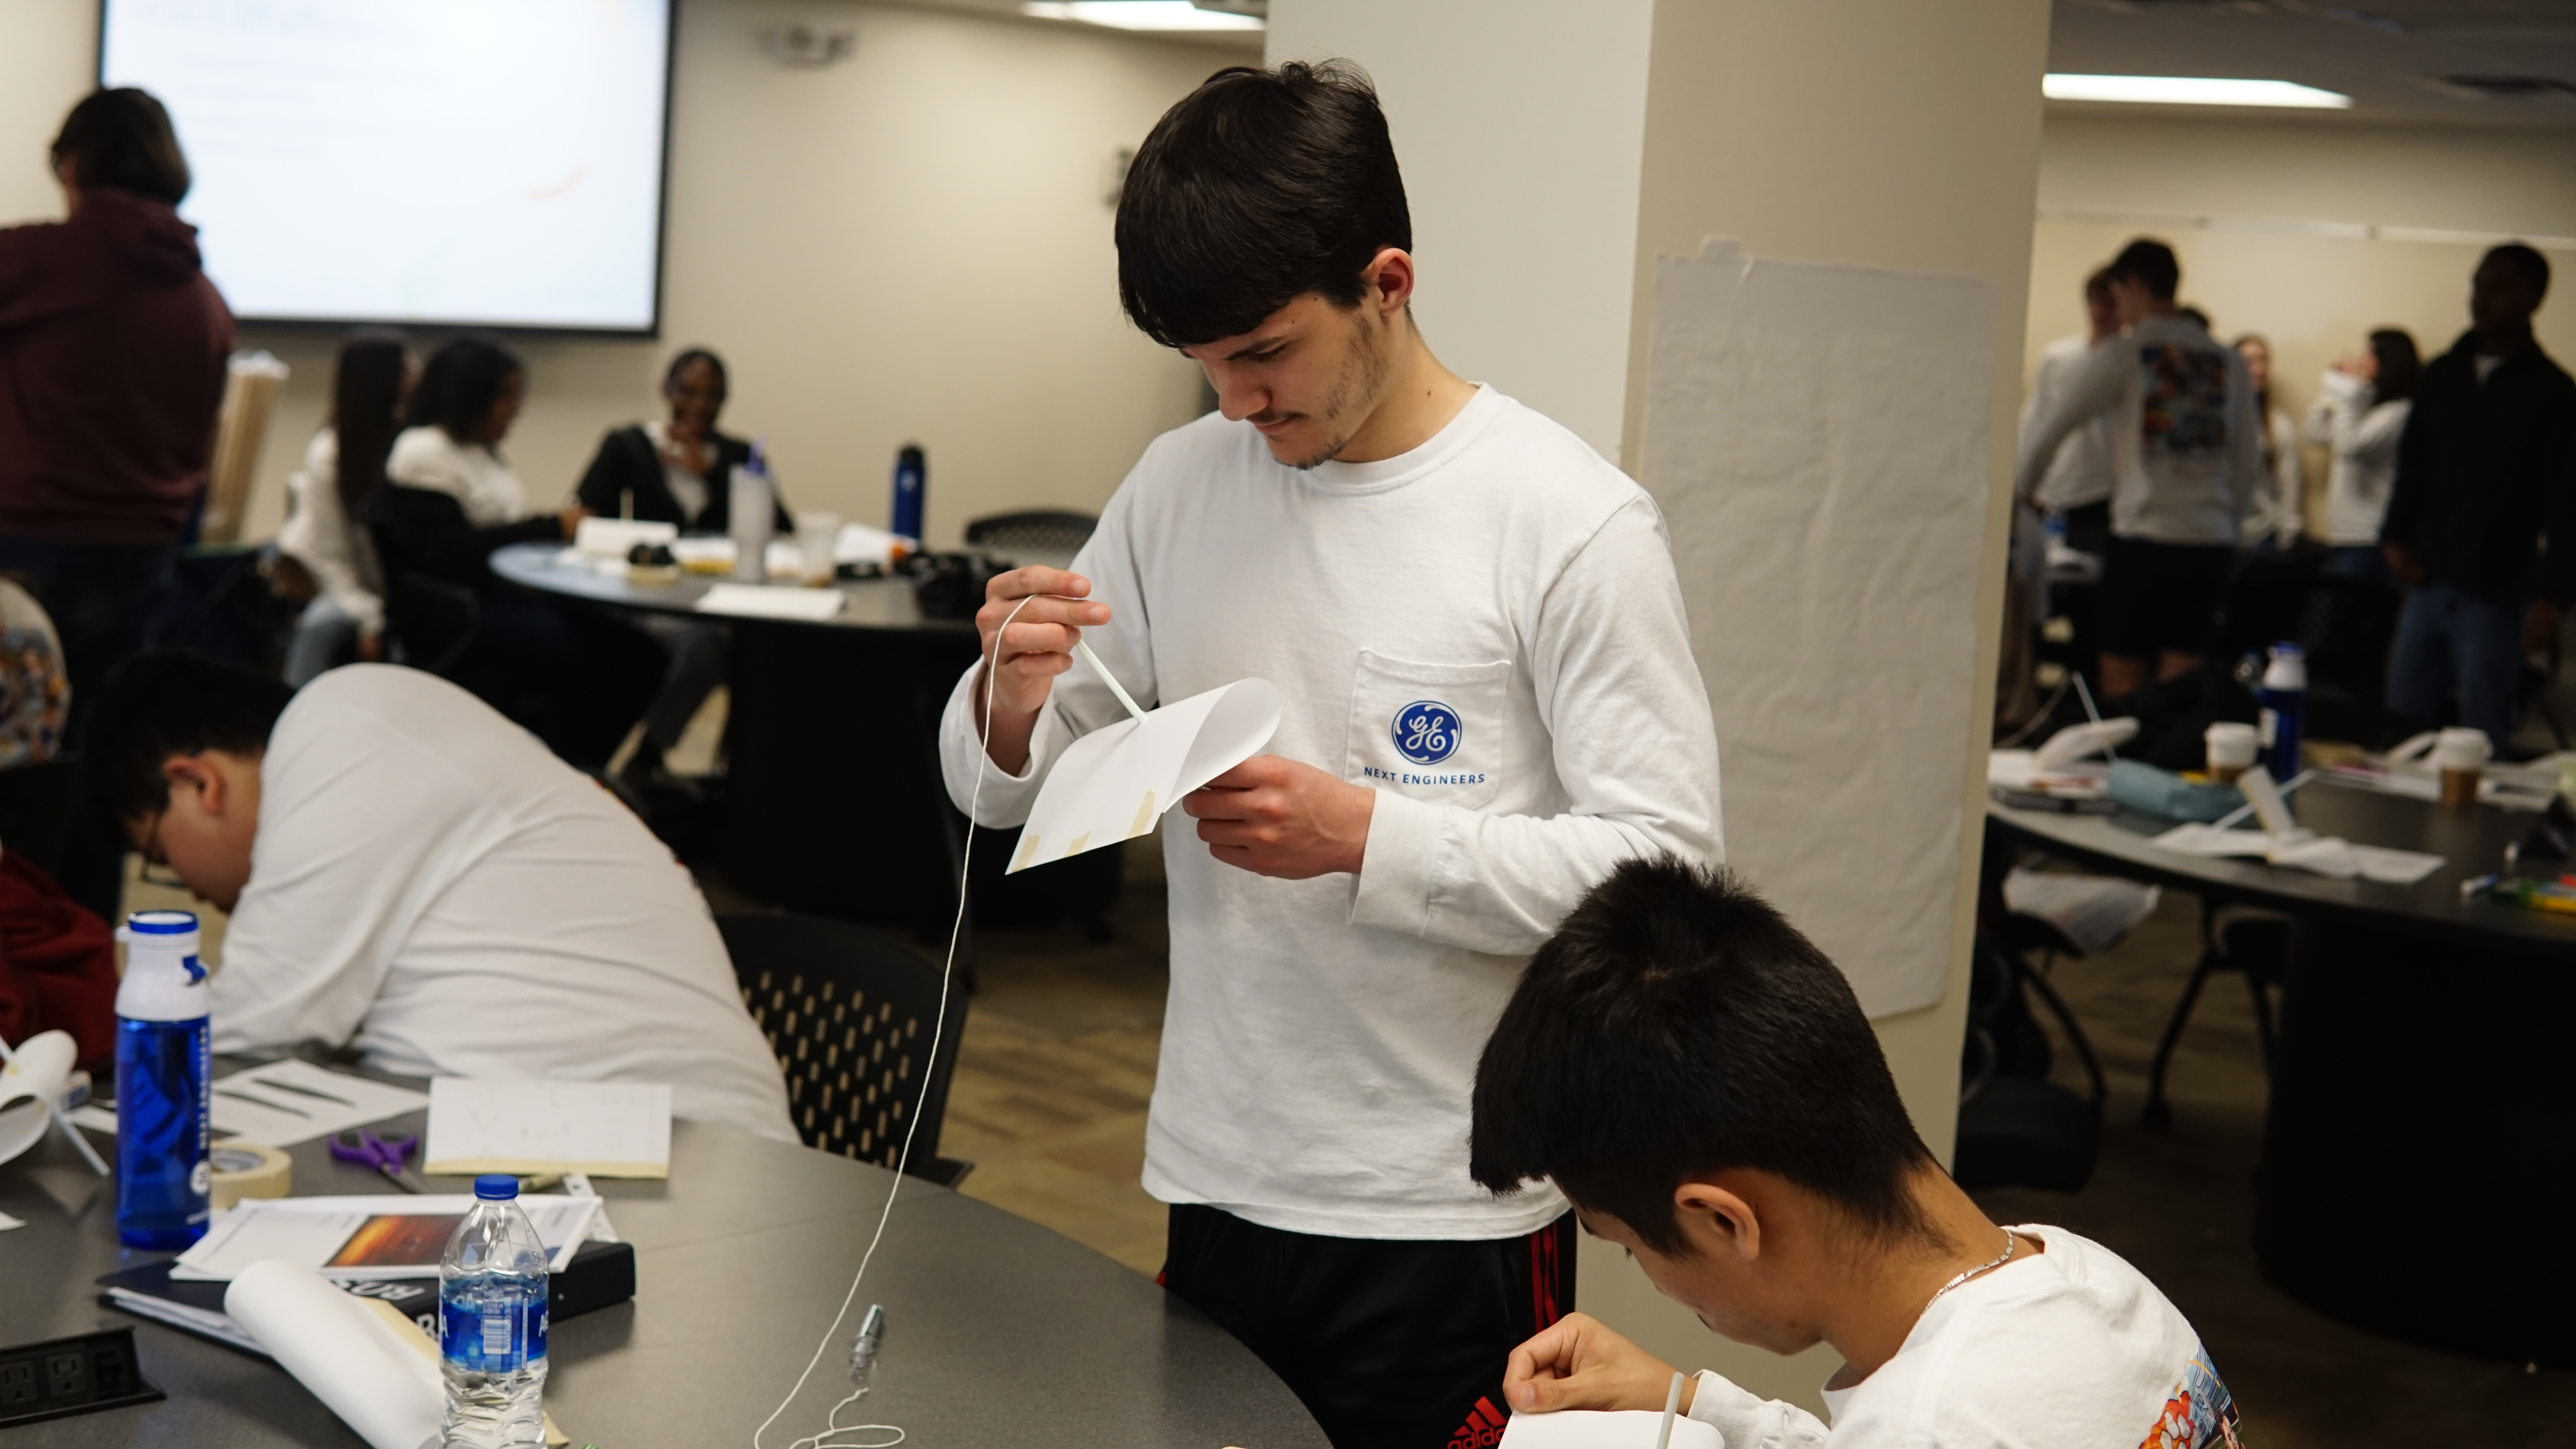 Academy students design airfoils with paper